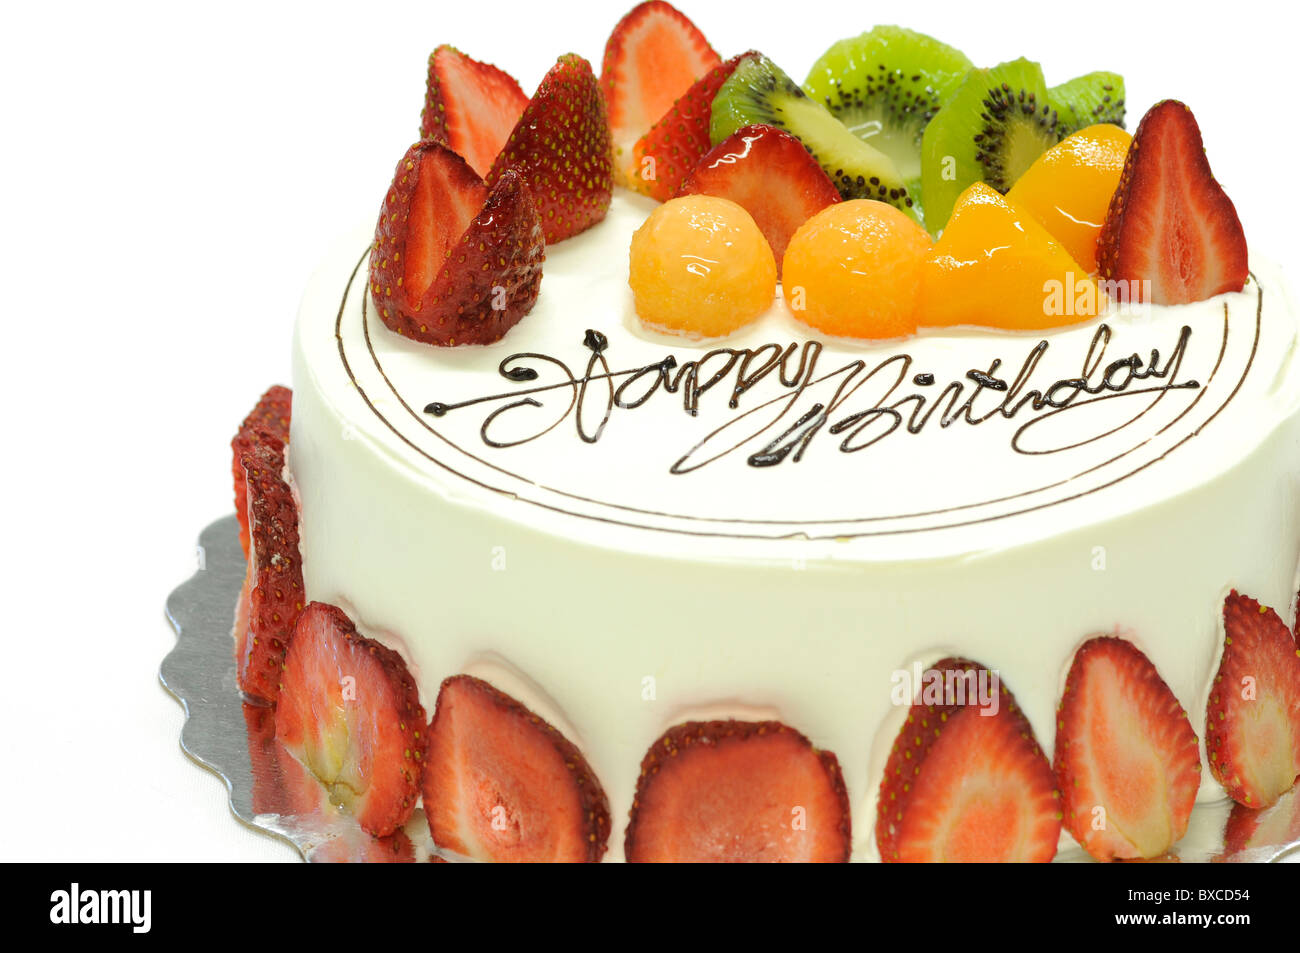 Tasty colorful fruit cake with happy birthday on it Stock Photo